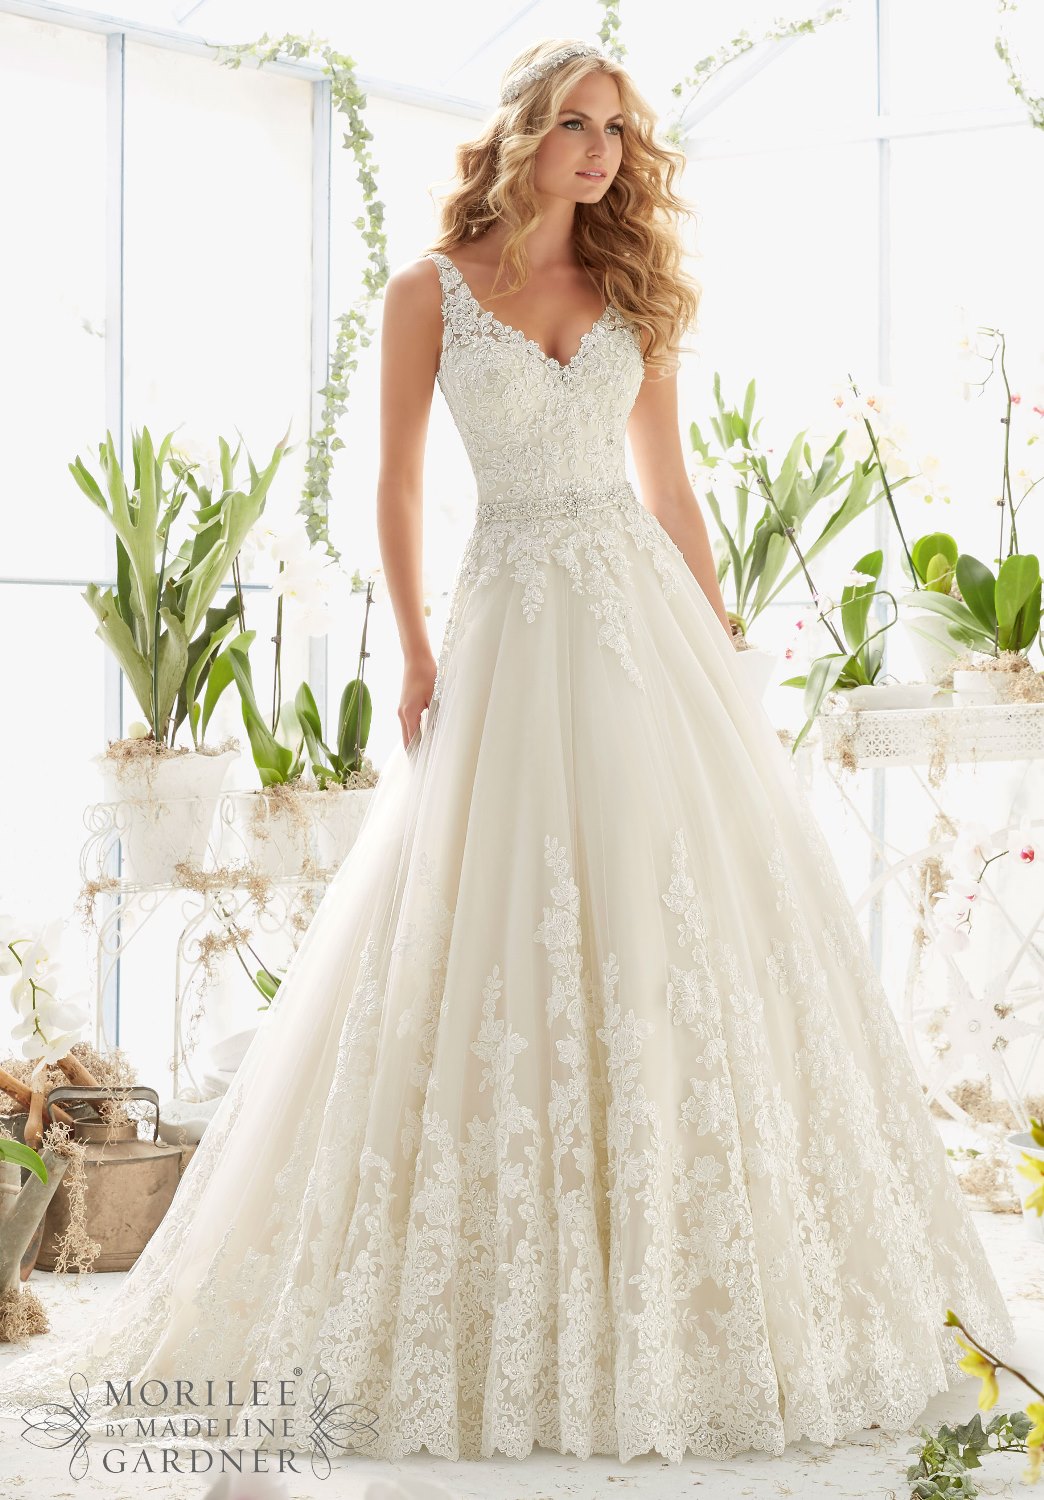 Dress - Mori Lee Bridal SPRING 2016 Collection: 2821 - Classic Tulle